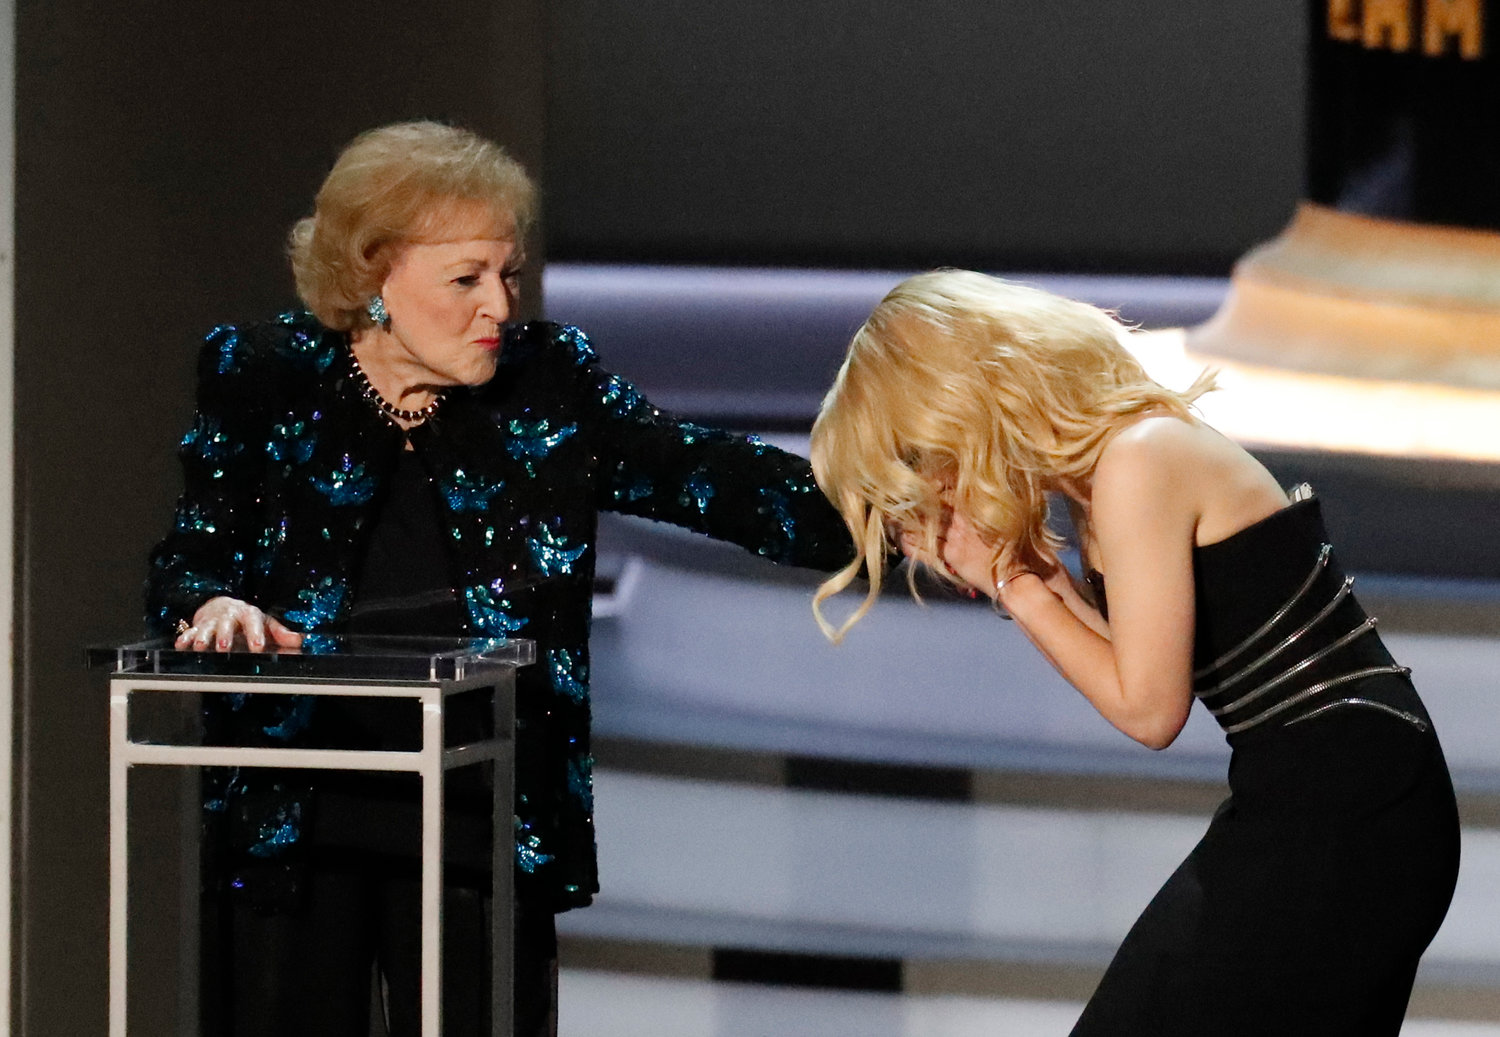 Betty White onstage with presenter Kate McKinnon during the 70th Primetime Emmy Awards at the Microsoft Theater in Los Angeles on Monday, Sept. 17, 2018. (Brian van der Brug/Los Angeles Times/TNS)